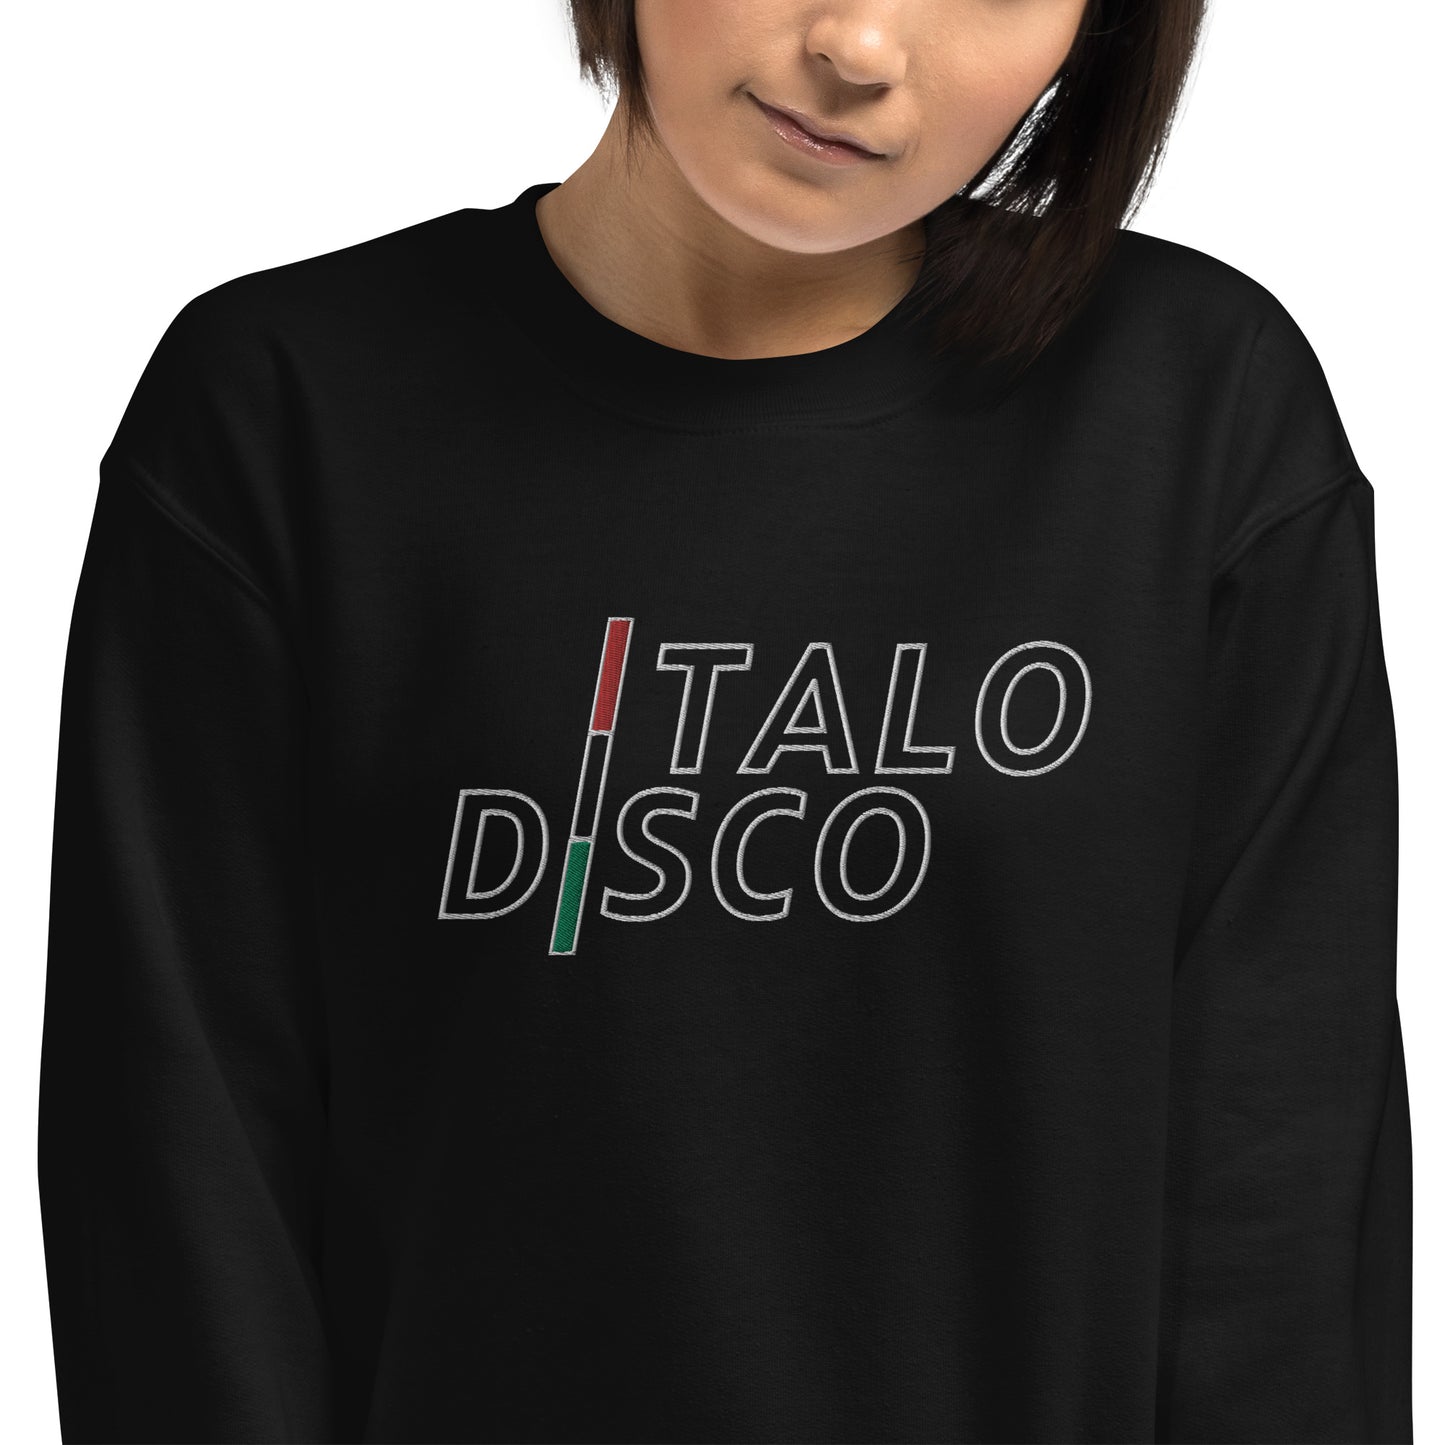 Italo with a White I - Embroidered Classic Jumper - PIZZ